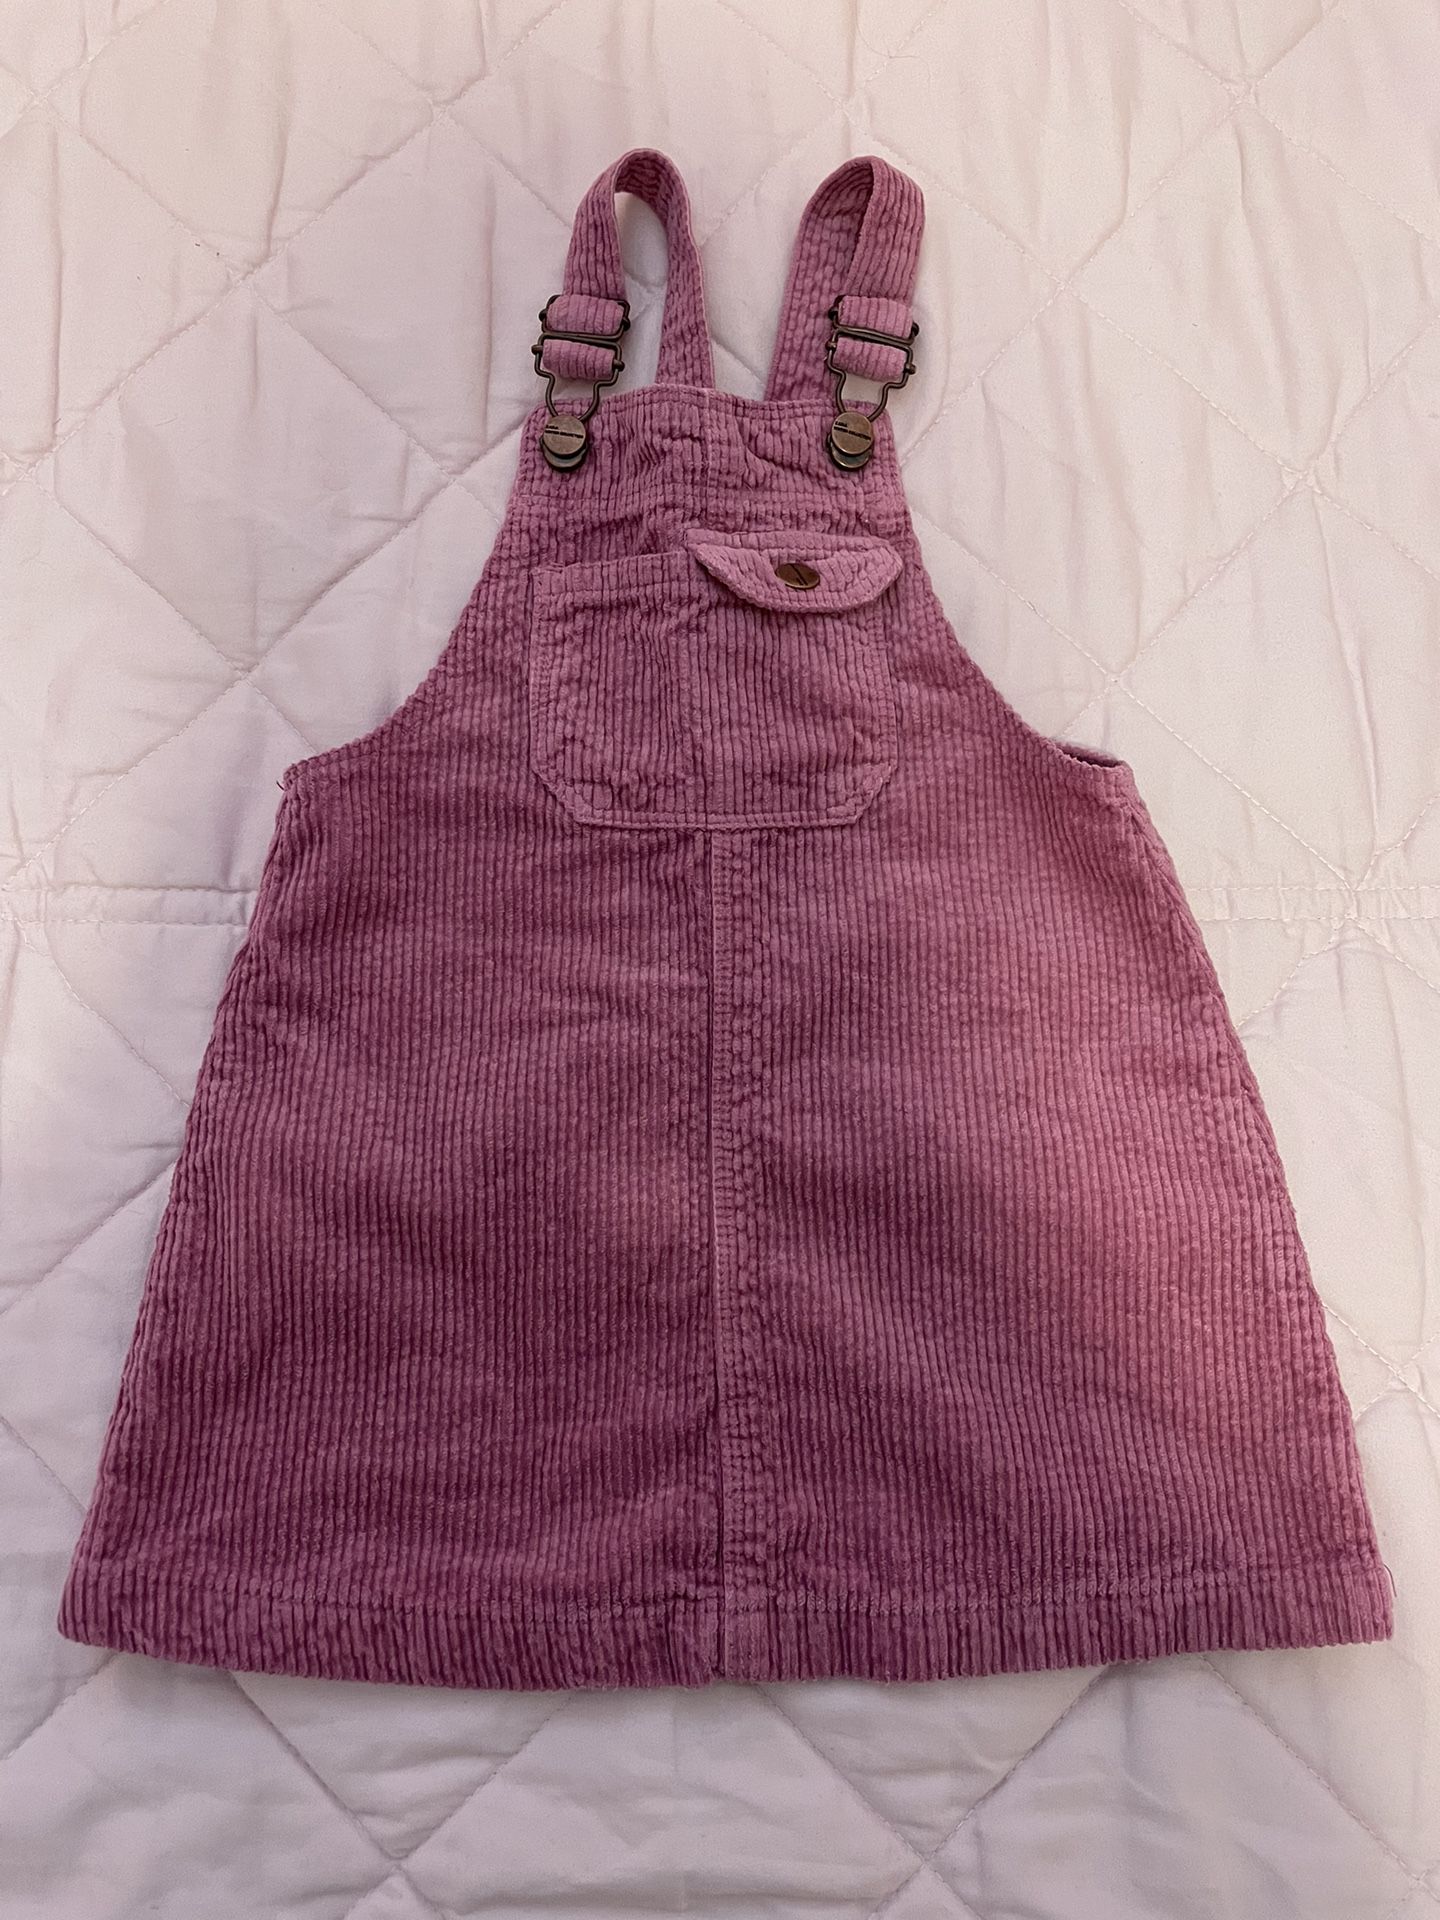 Toddler Overall Dress